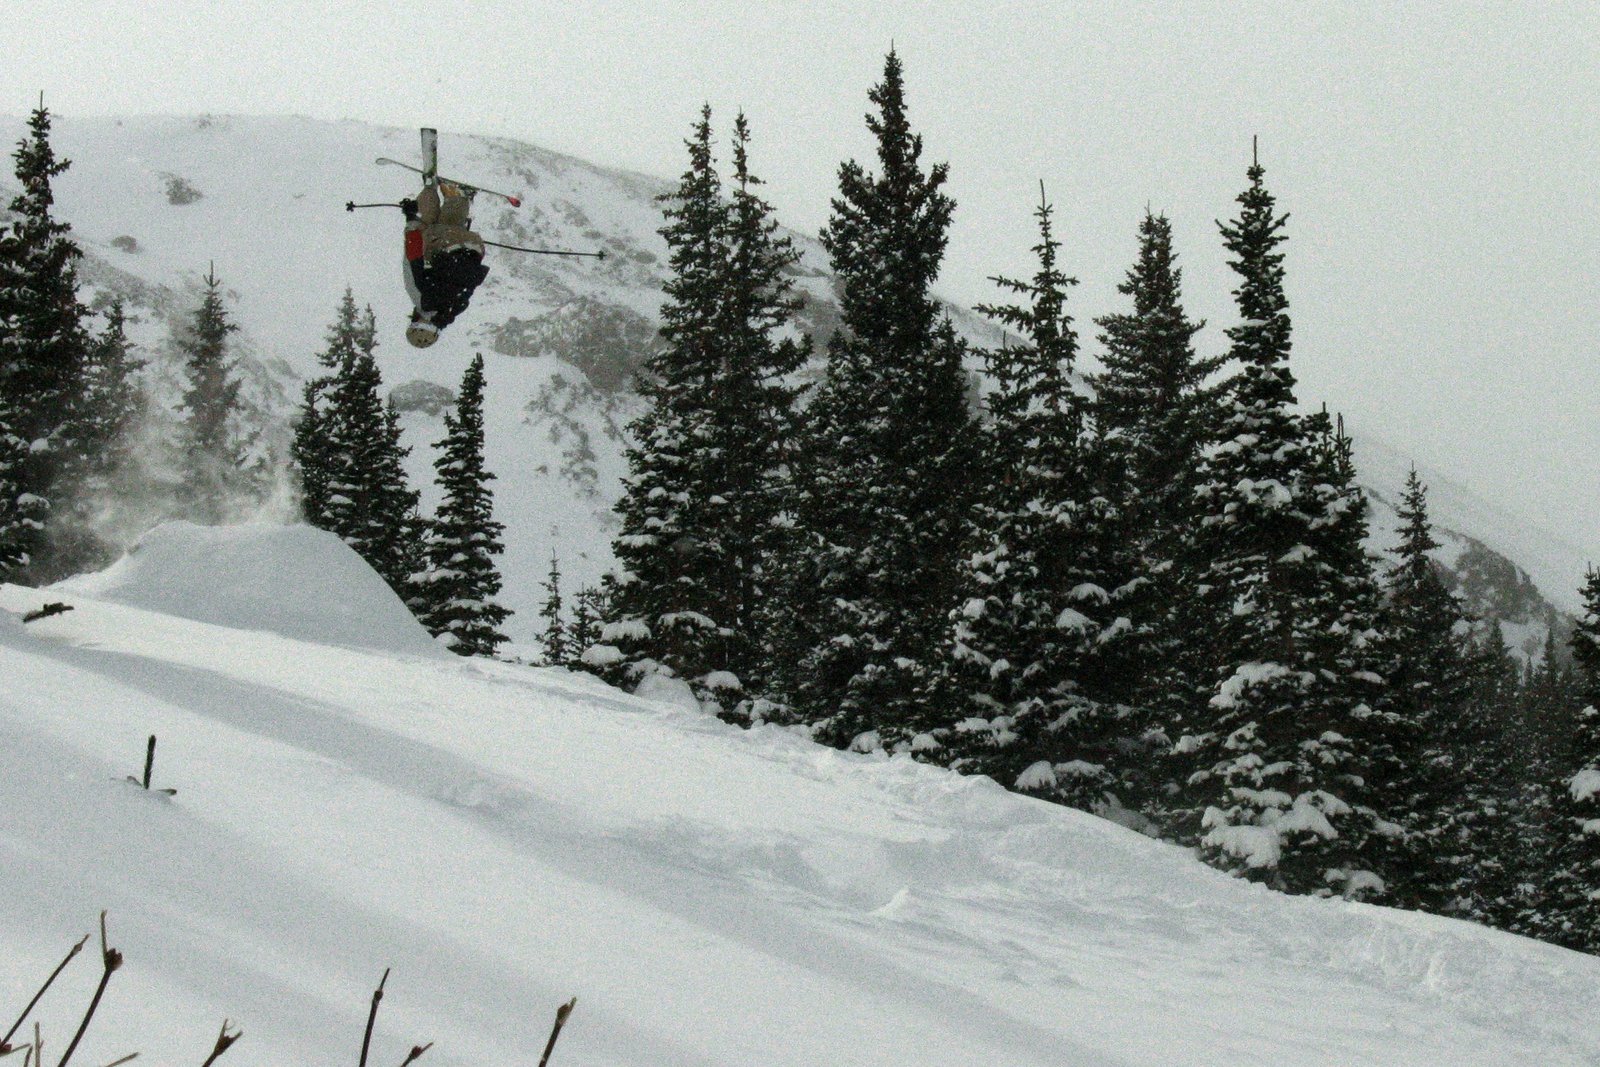 Backflips in the Backcountry at Breckenridge